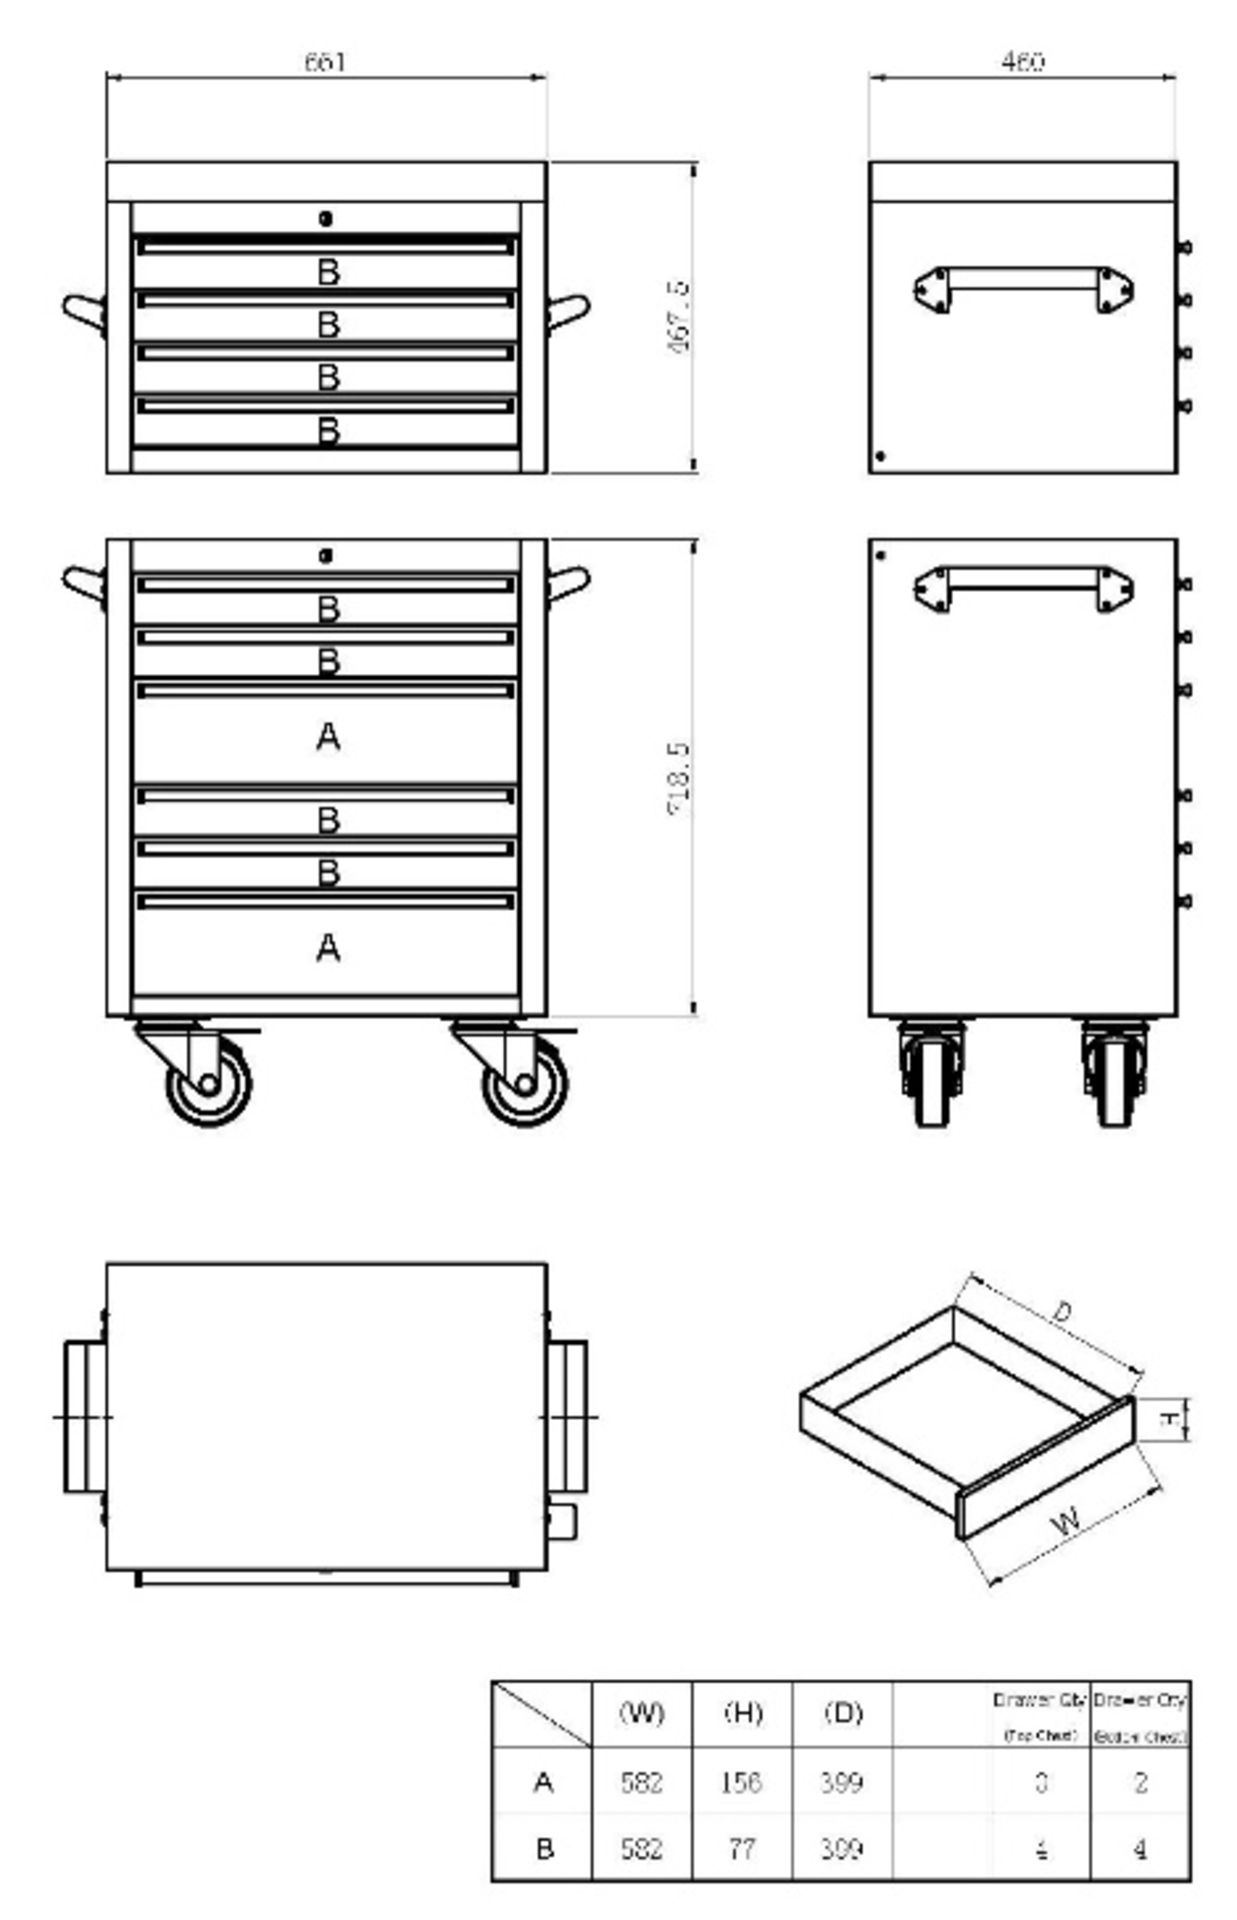 3 units x 26 inch 10 draw stainless steel storage unit 661mm W x 1280mm H 460mm D NEW and BOXED - Image 2 of 2